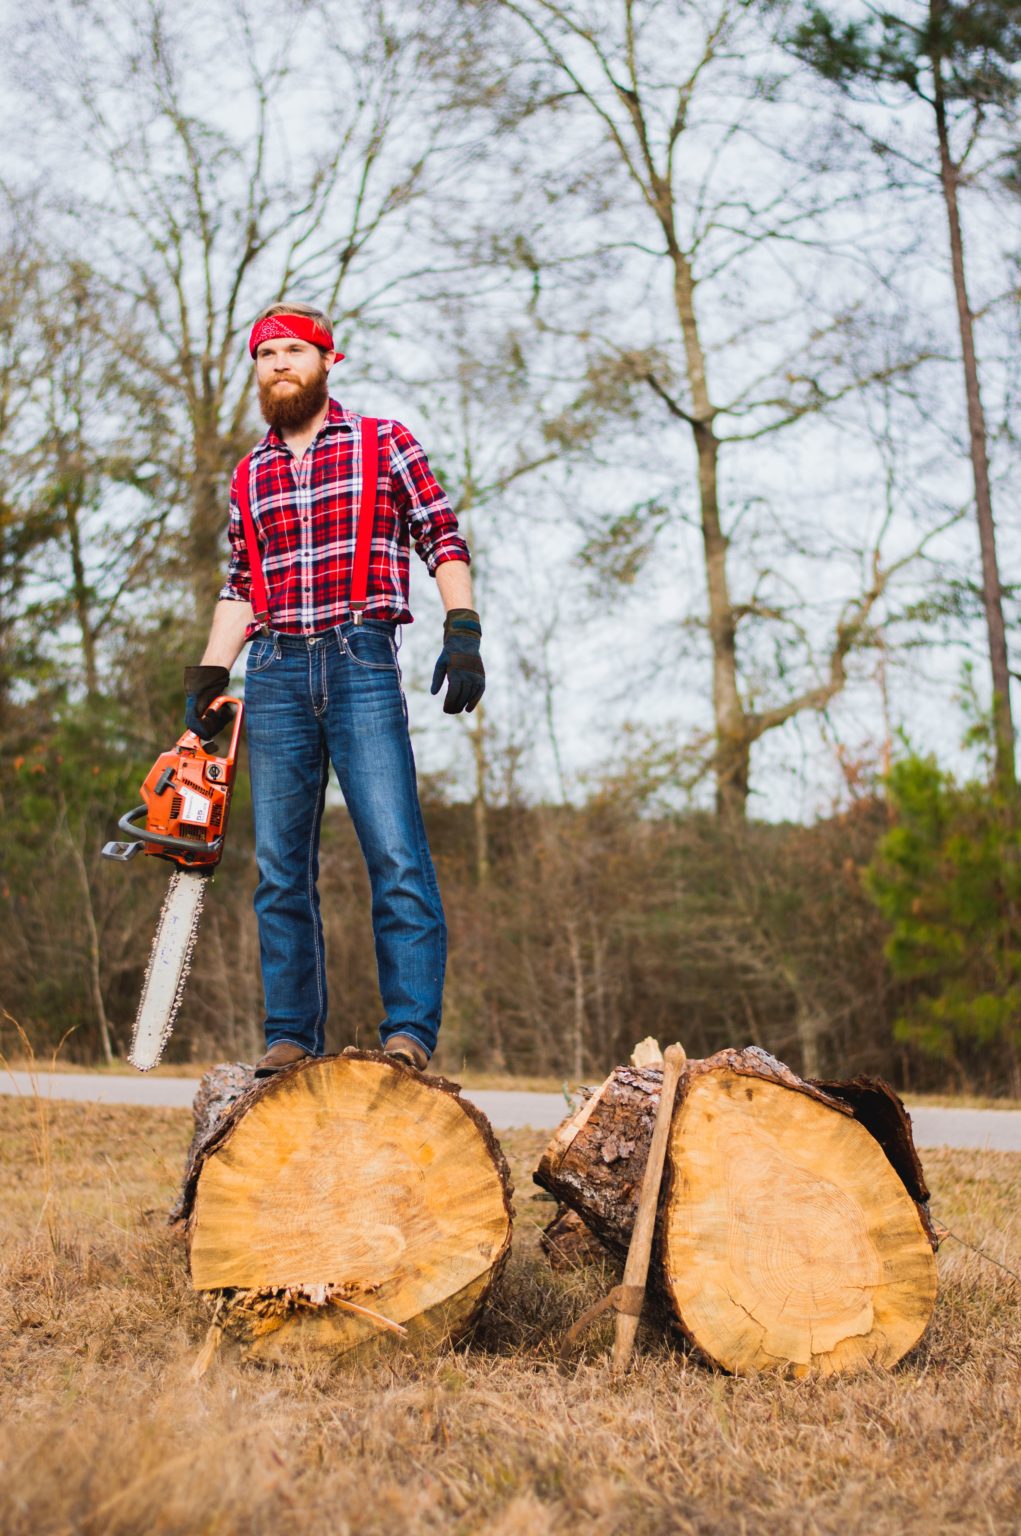 A bearded man in a red plaid shirt stands on a log, holding a chainsaw after cutting through wood.